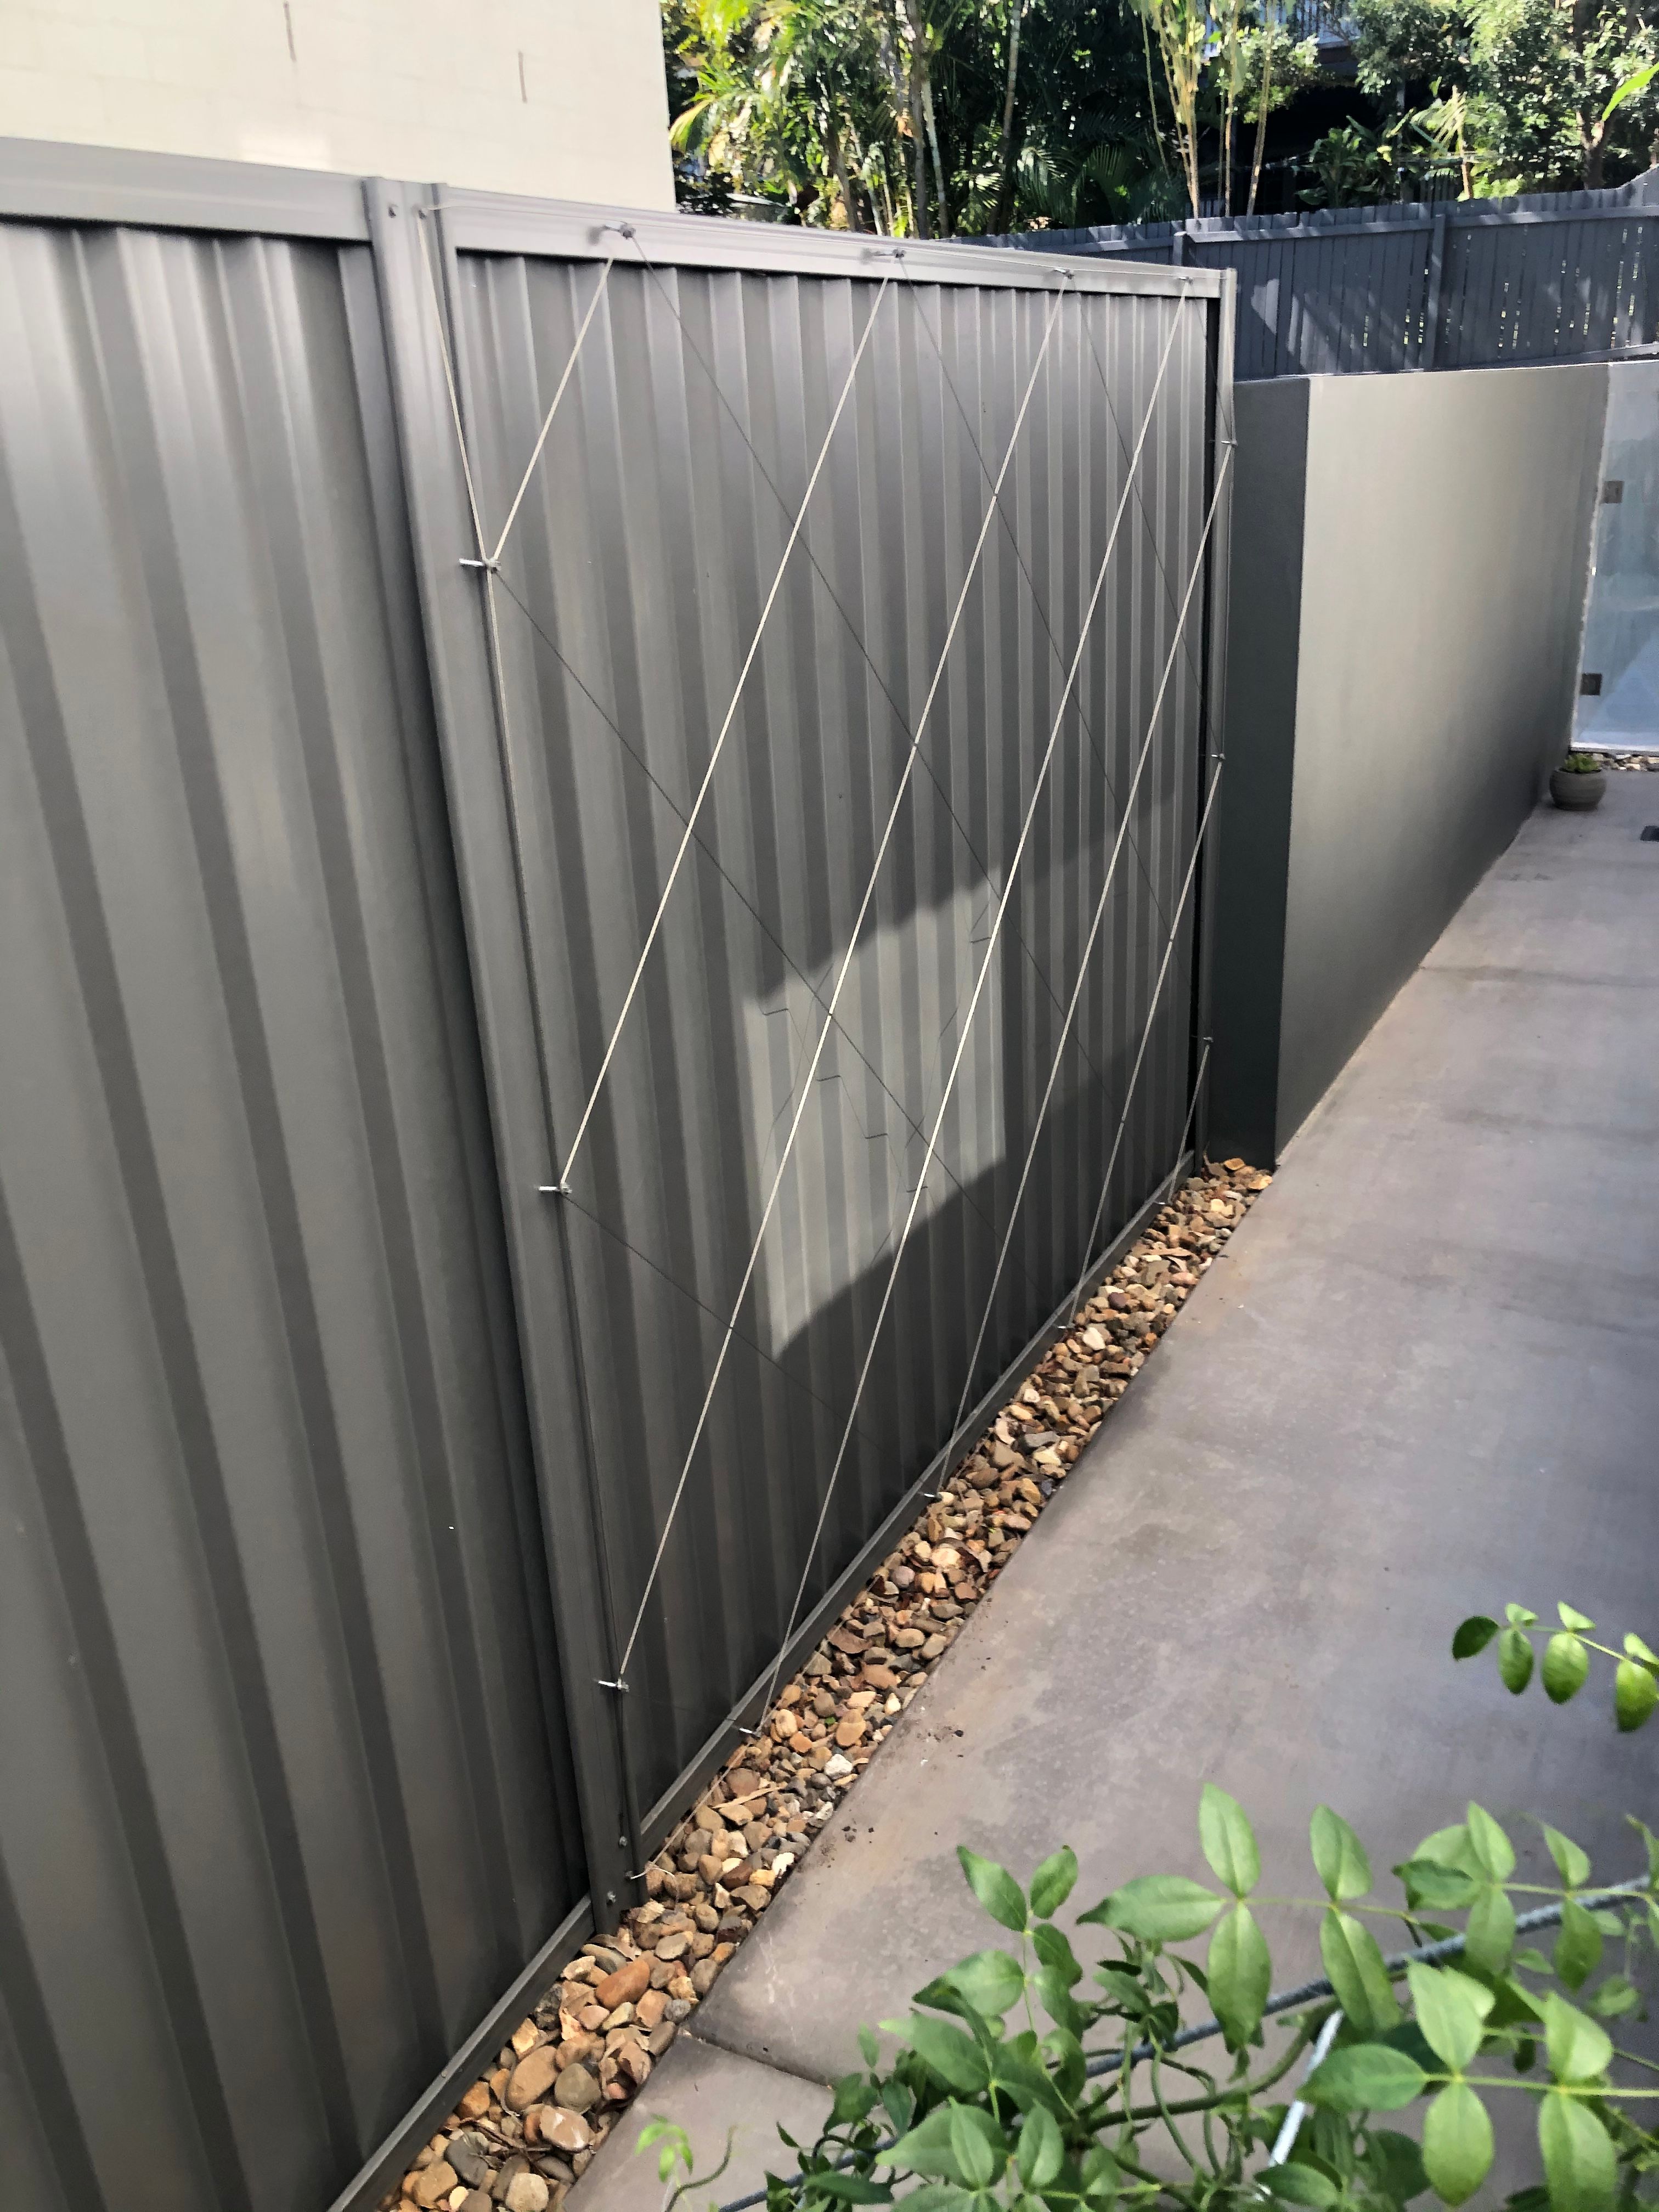 Climbers to dress up Colorbond fence | Bunnings Workshop community